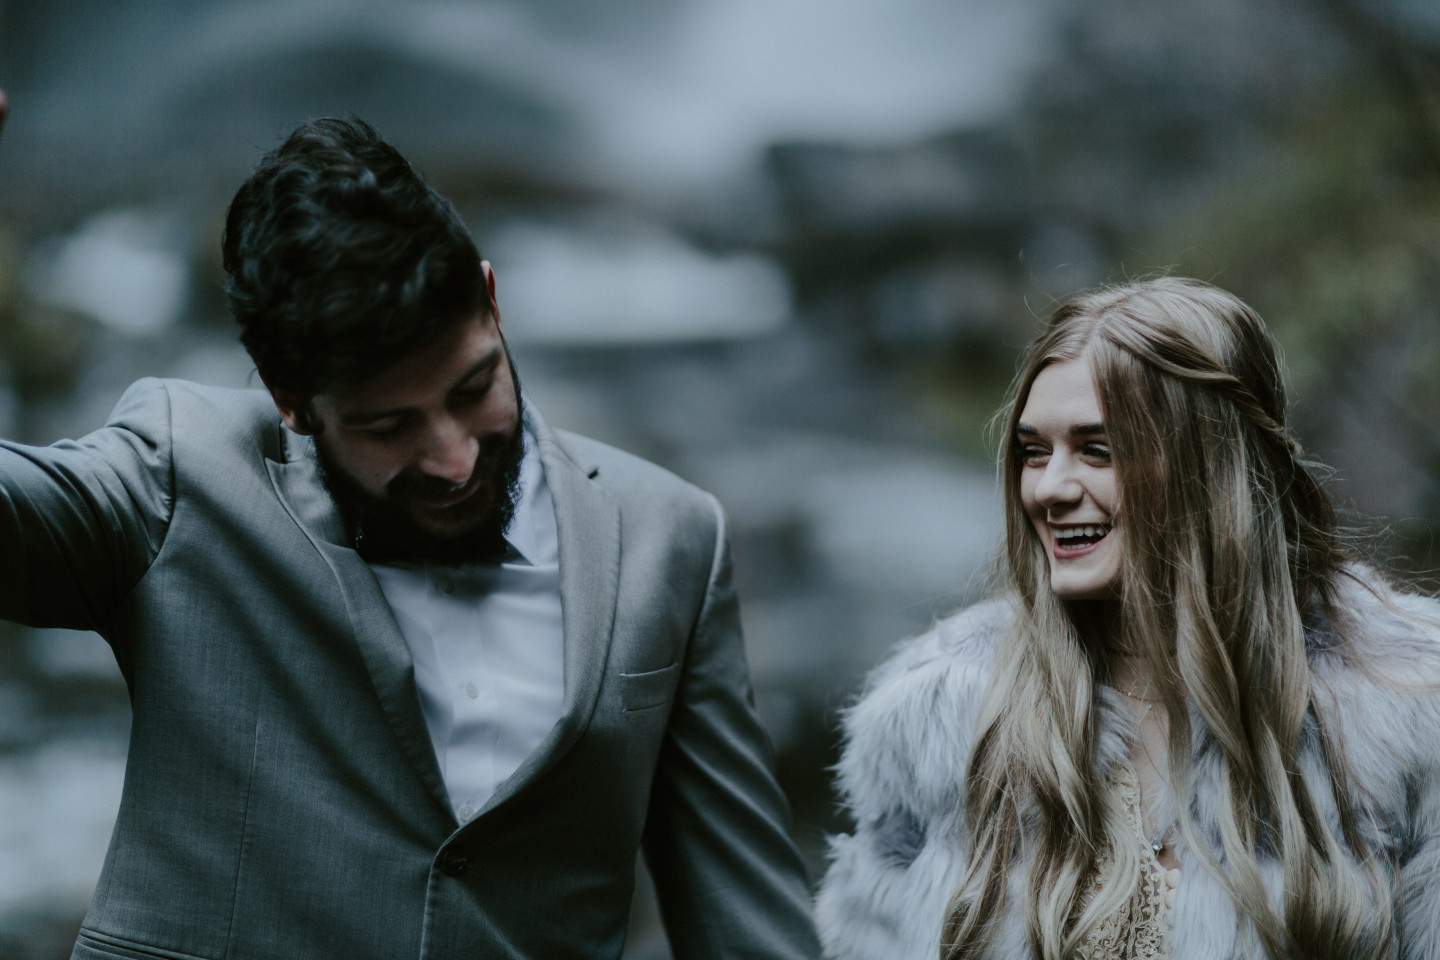 Boris and Tyanna newly married. Adventure elopement in the Columbia River Gorge by Sienna Plus Josh.